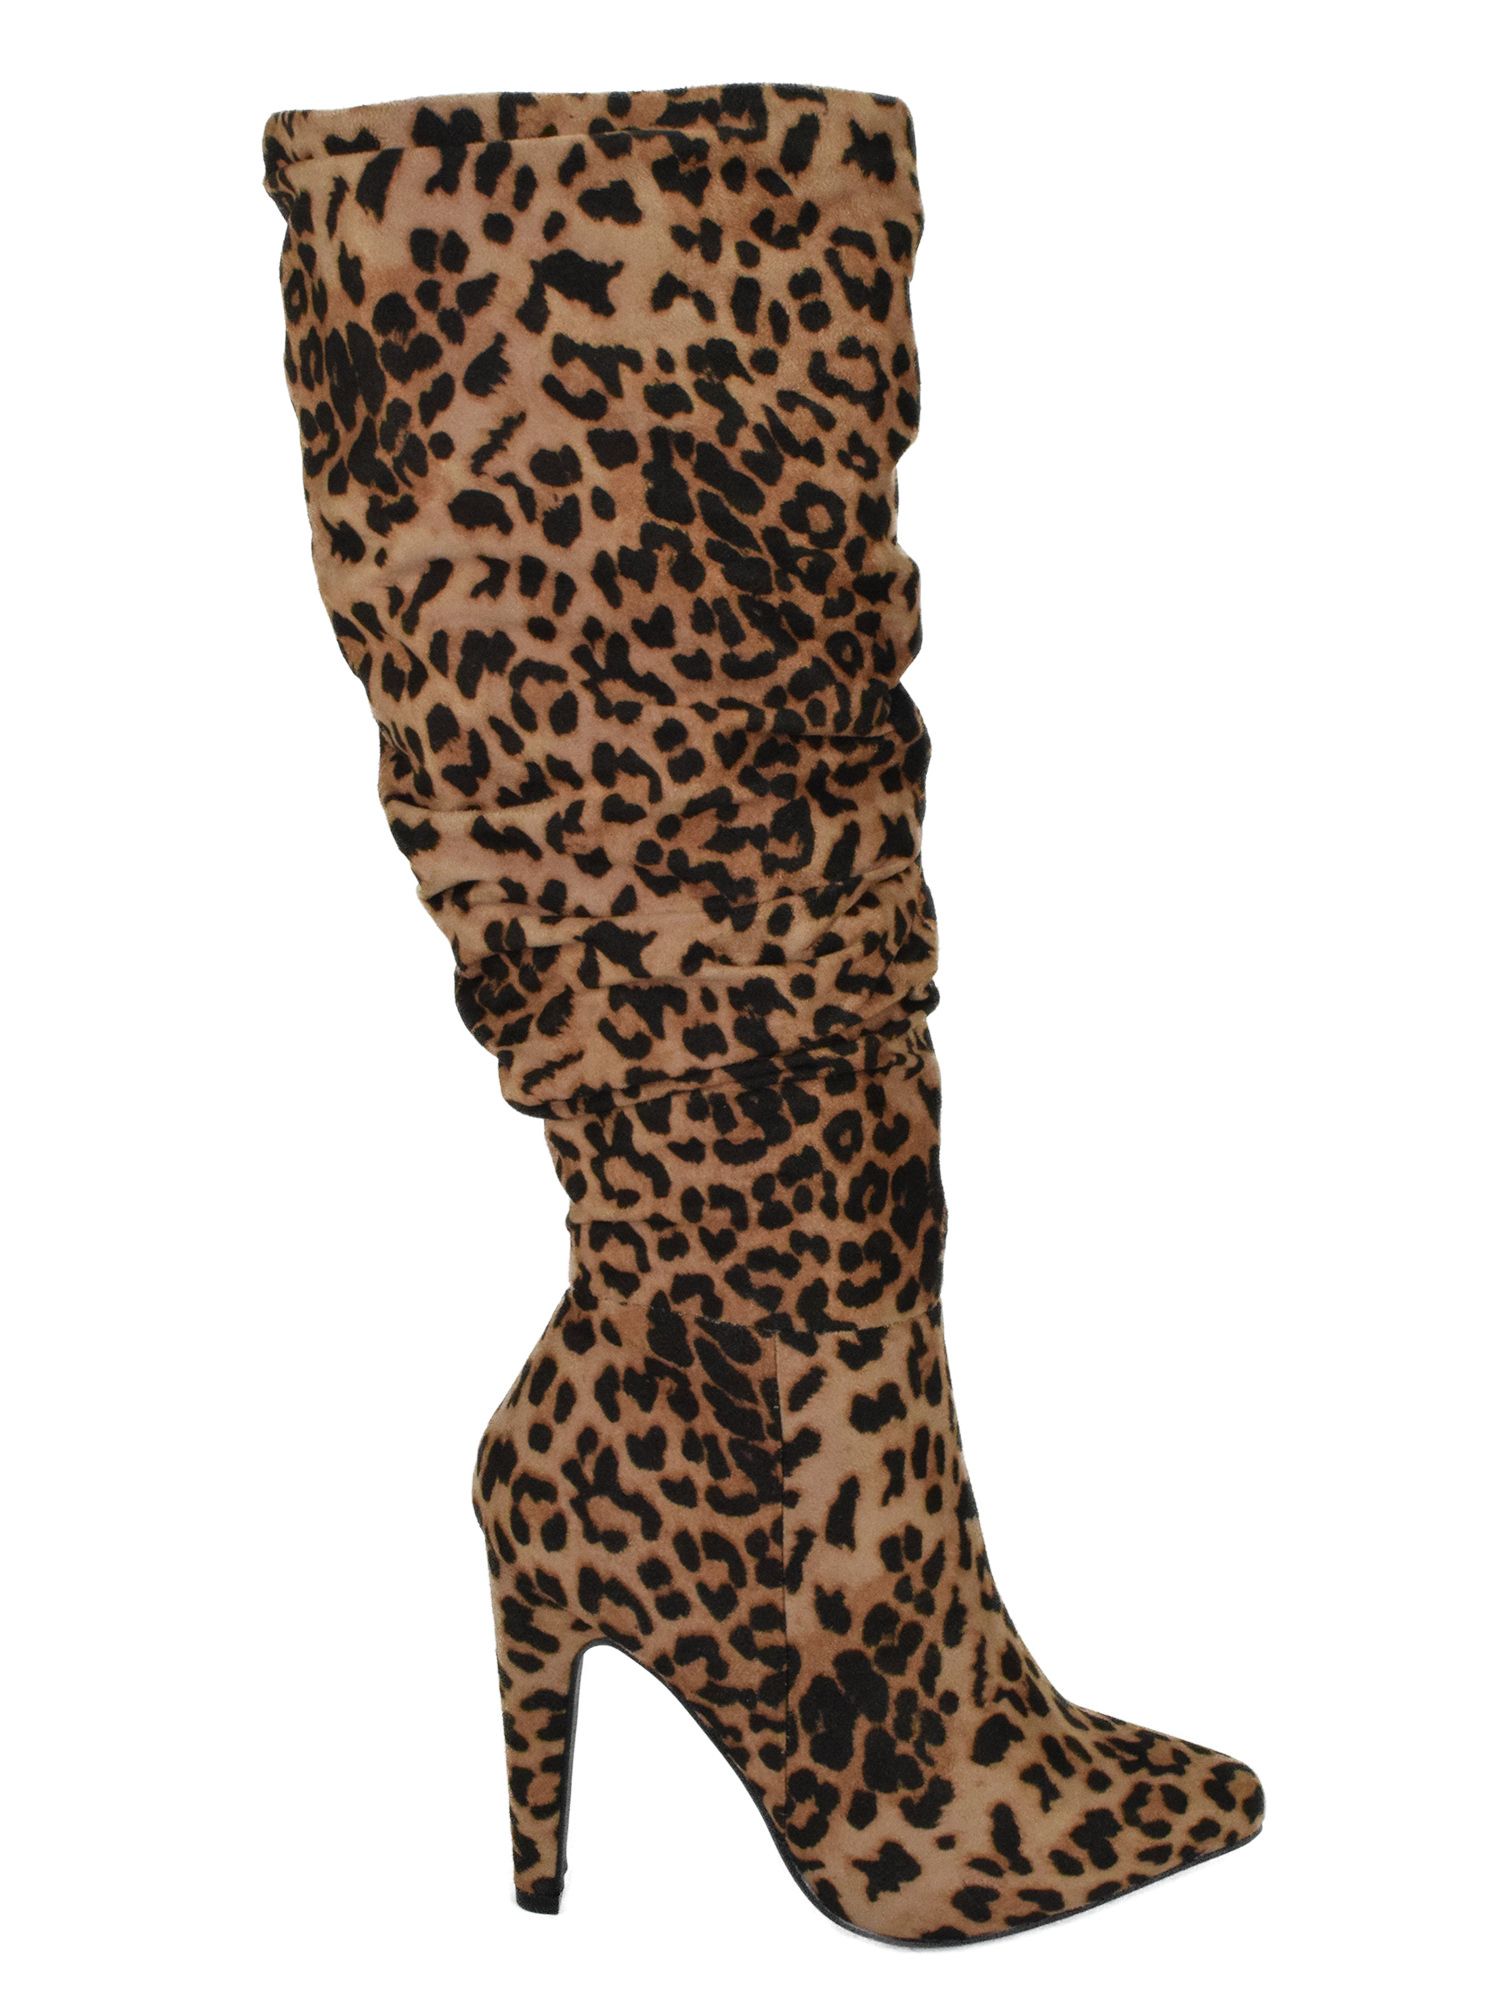 EVERY Cheetah Leopard Print Suede Delicious Women Stiletto High Heels Slouchy Pointy Toe Knee High Boots 5.5 - image 2 of 3